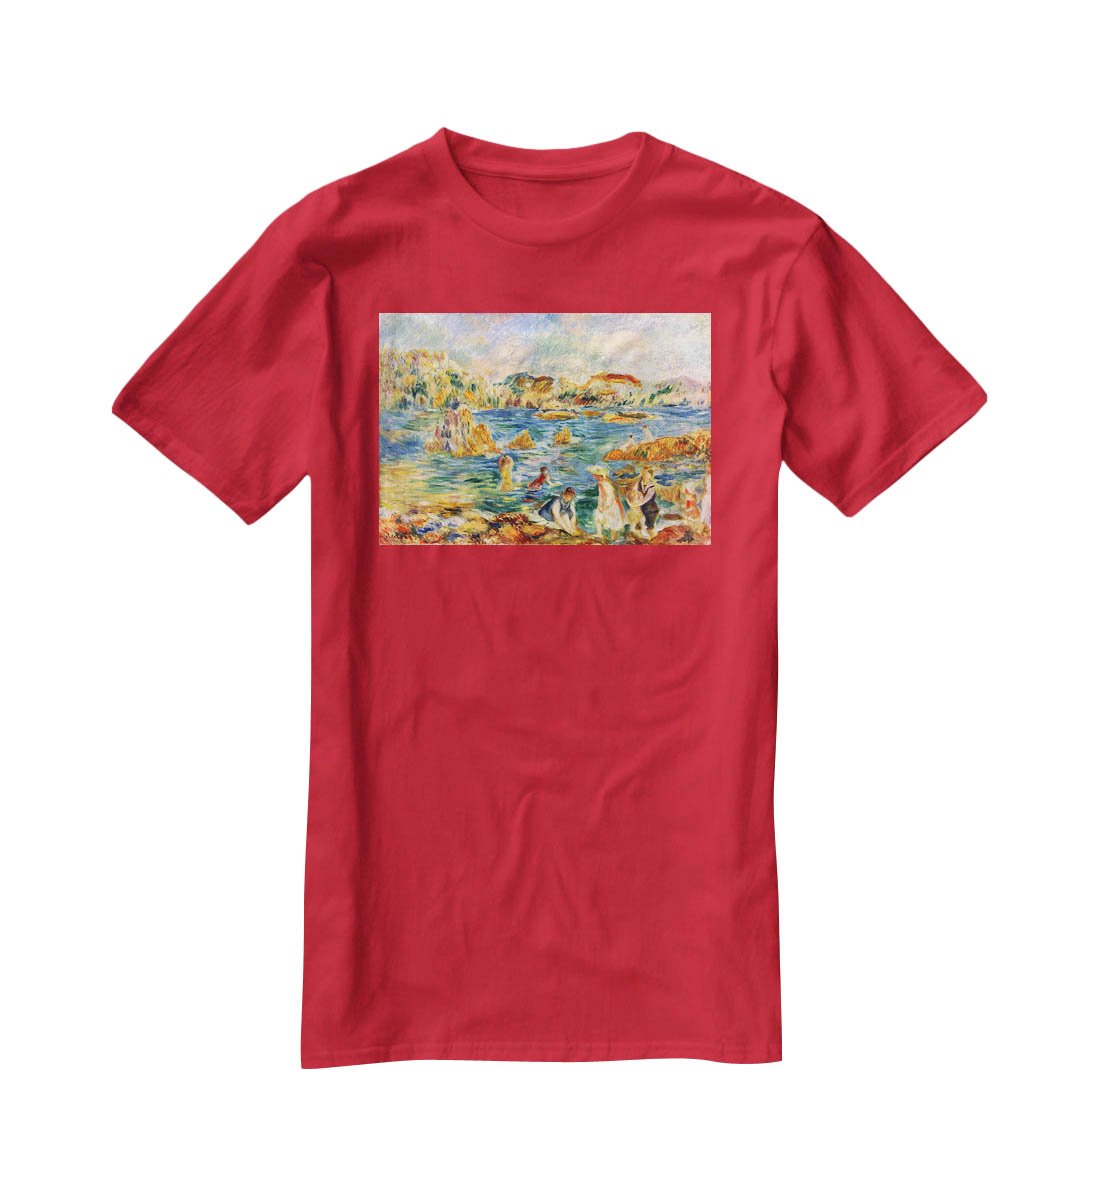 At the beach of Guernesey by Renoir T-Shirt - Canvas Art Rocks - 4